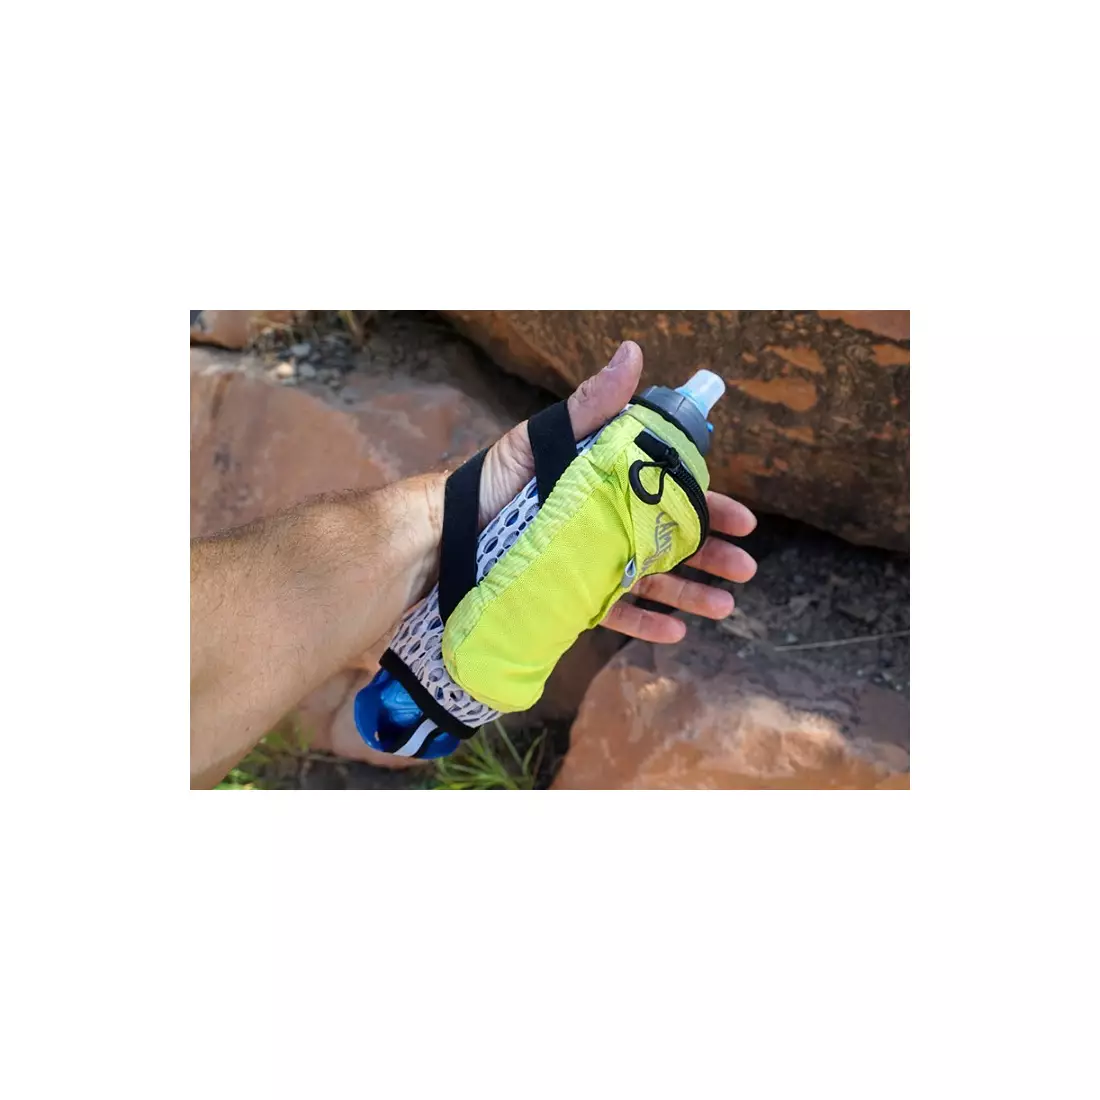 Camelbak SS17 Ultra Handheld Chill 17 oz/ 0,5 l Quick Stow Flask Lime Punch/Black 1143301900